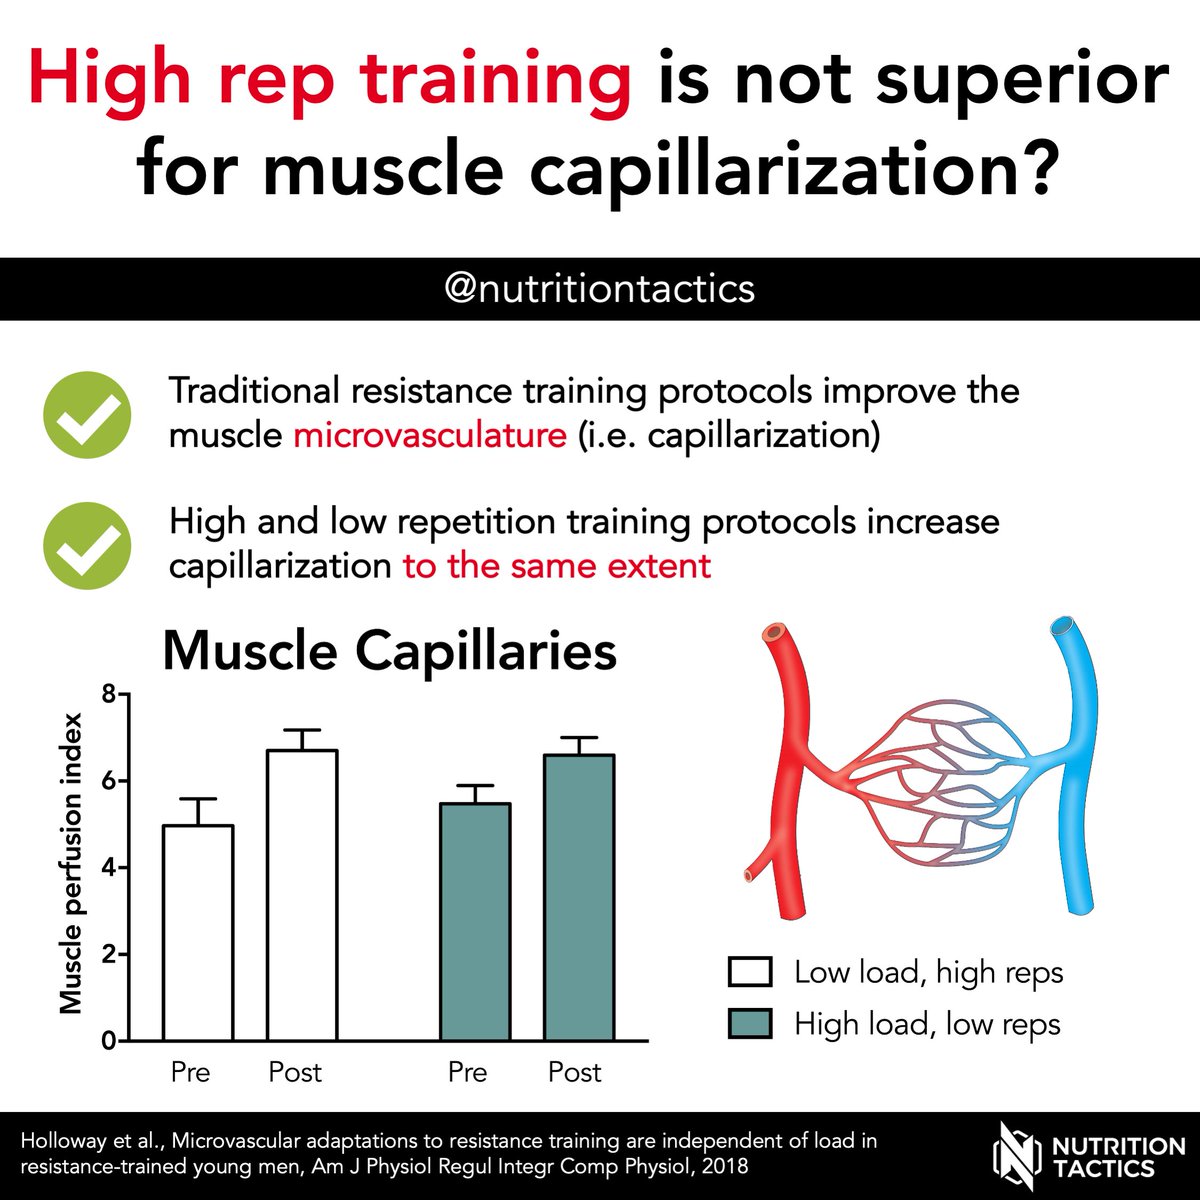 Are high rep resistance training protocols superior to increase muscle capillarization? A thread 🧵👇 #capillarization #highrep #resistancetraining